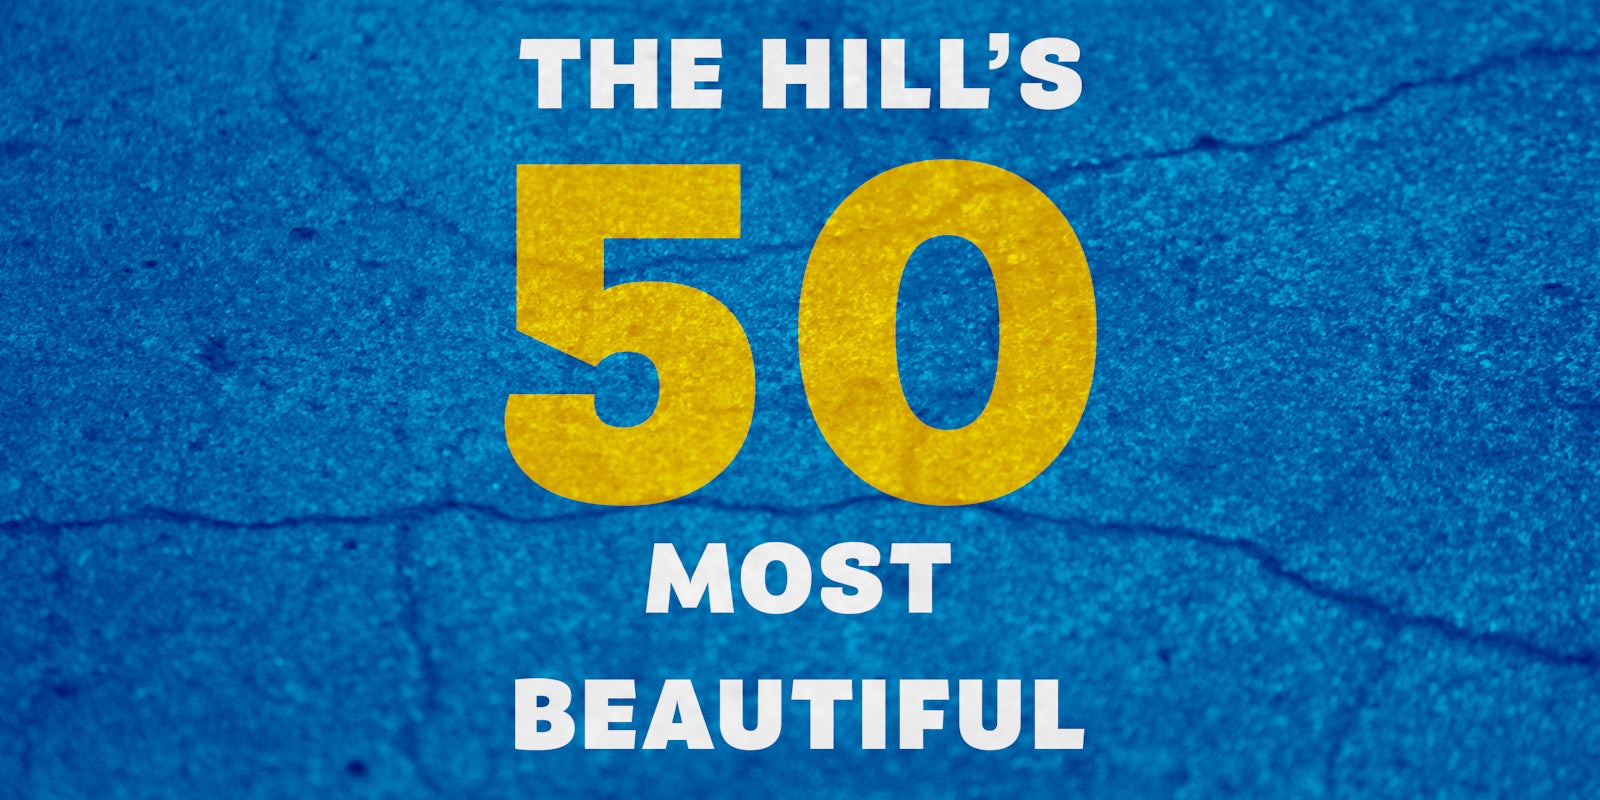 'The Hill's 50 Most Beautiful' over cracked concrete